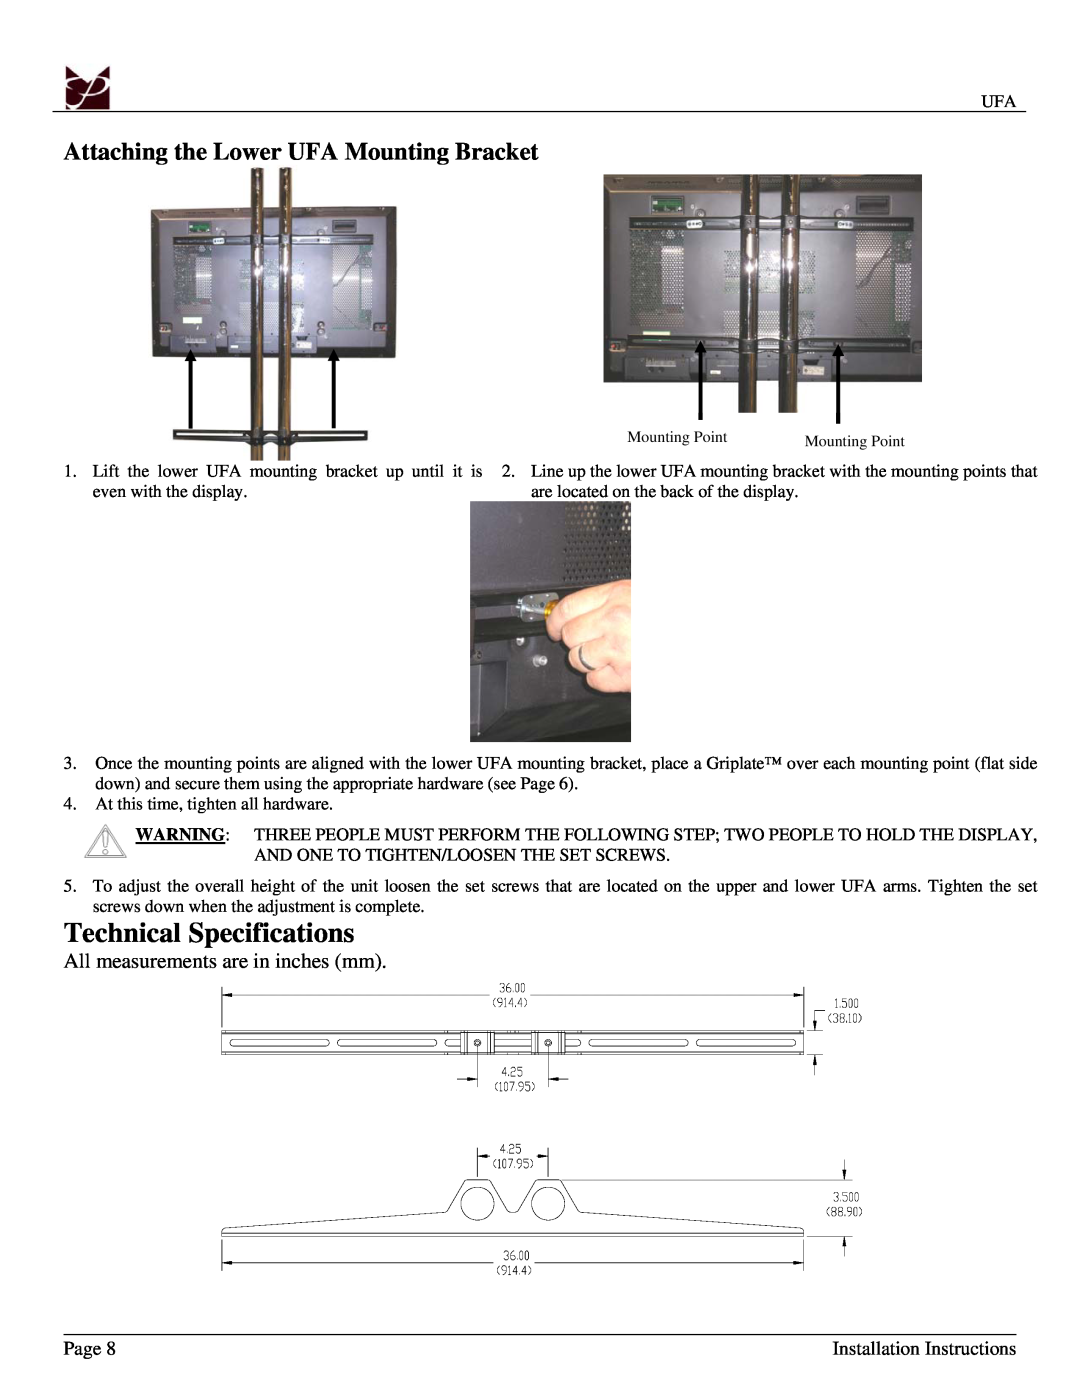 Premier Mounts Technical Specifications, Attaching the Lower UFA Mounting Bracket, All measurements are in inches mm 